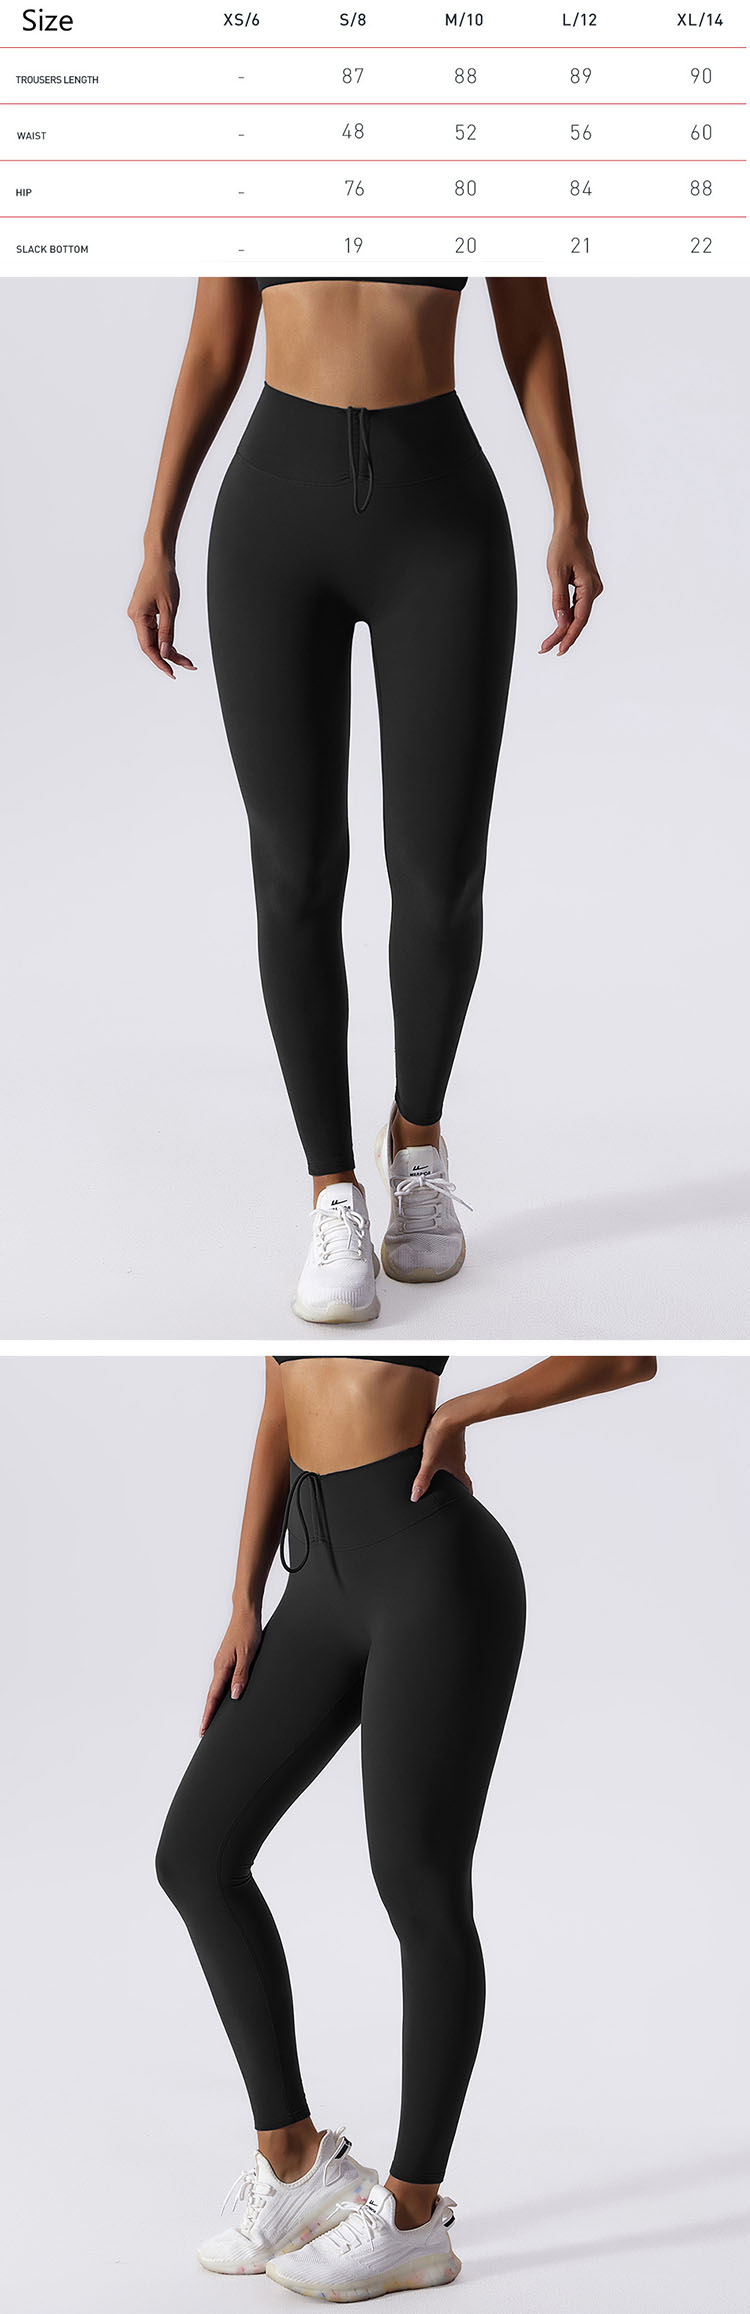 Next yoga pants focus the design on the front and middle design, with hollowing as the main element